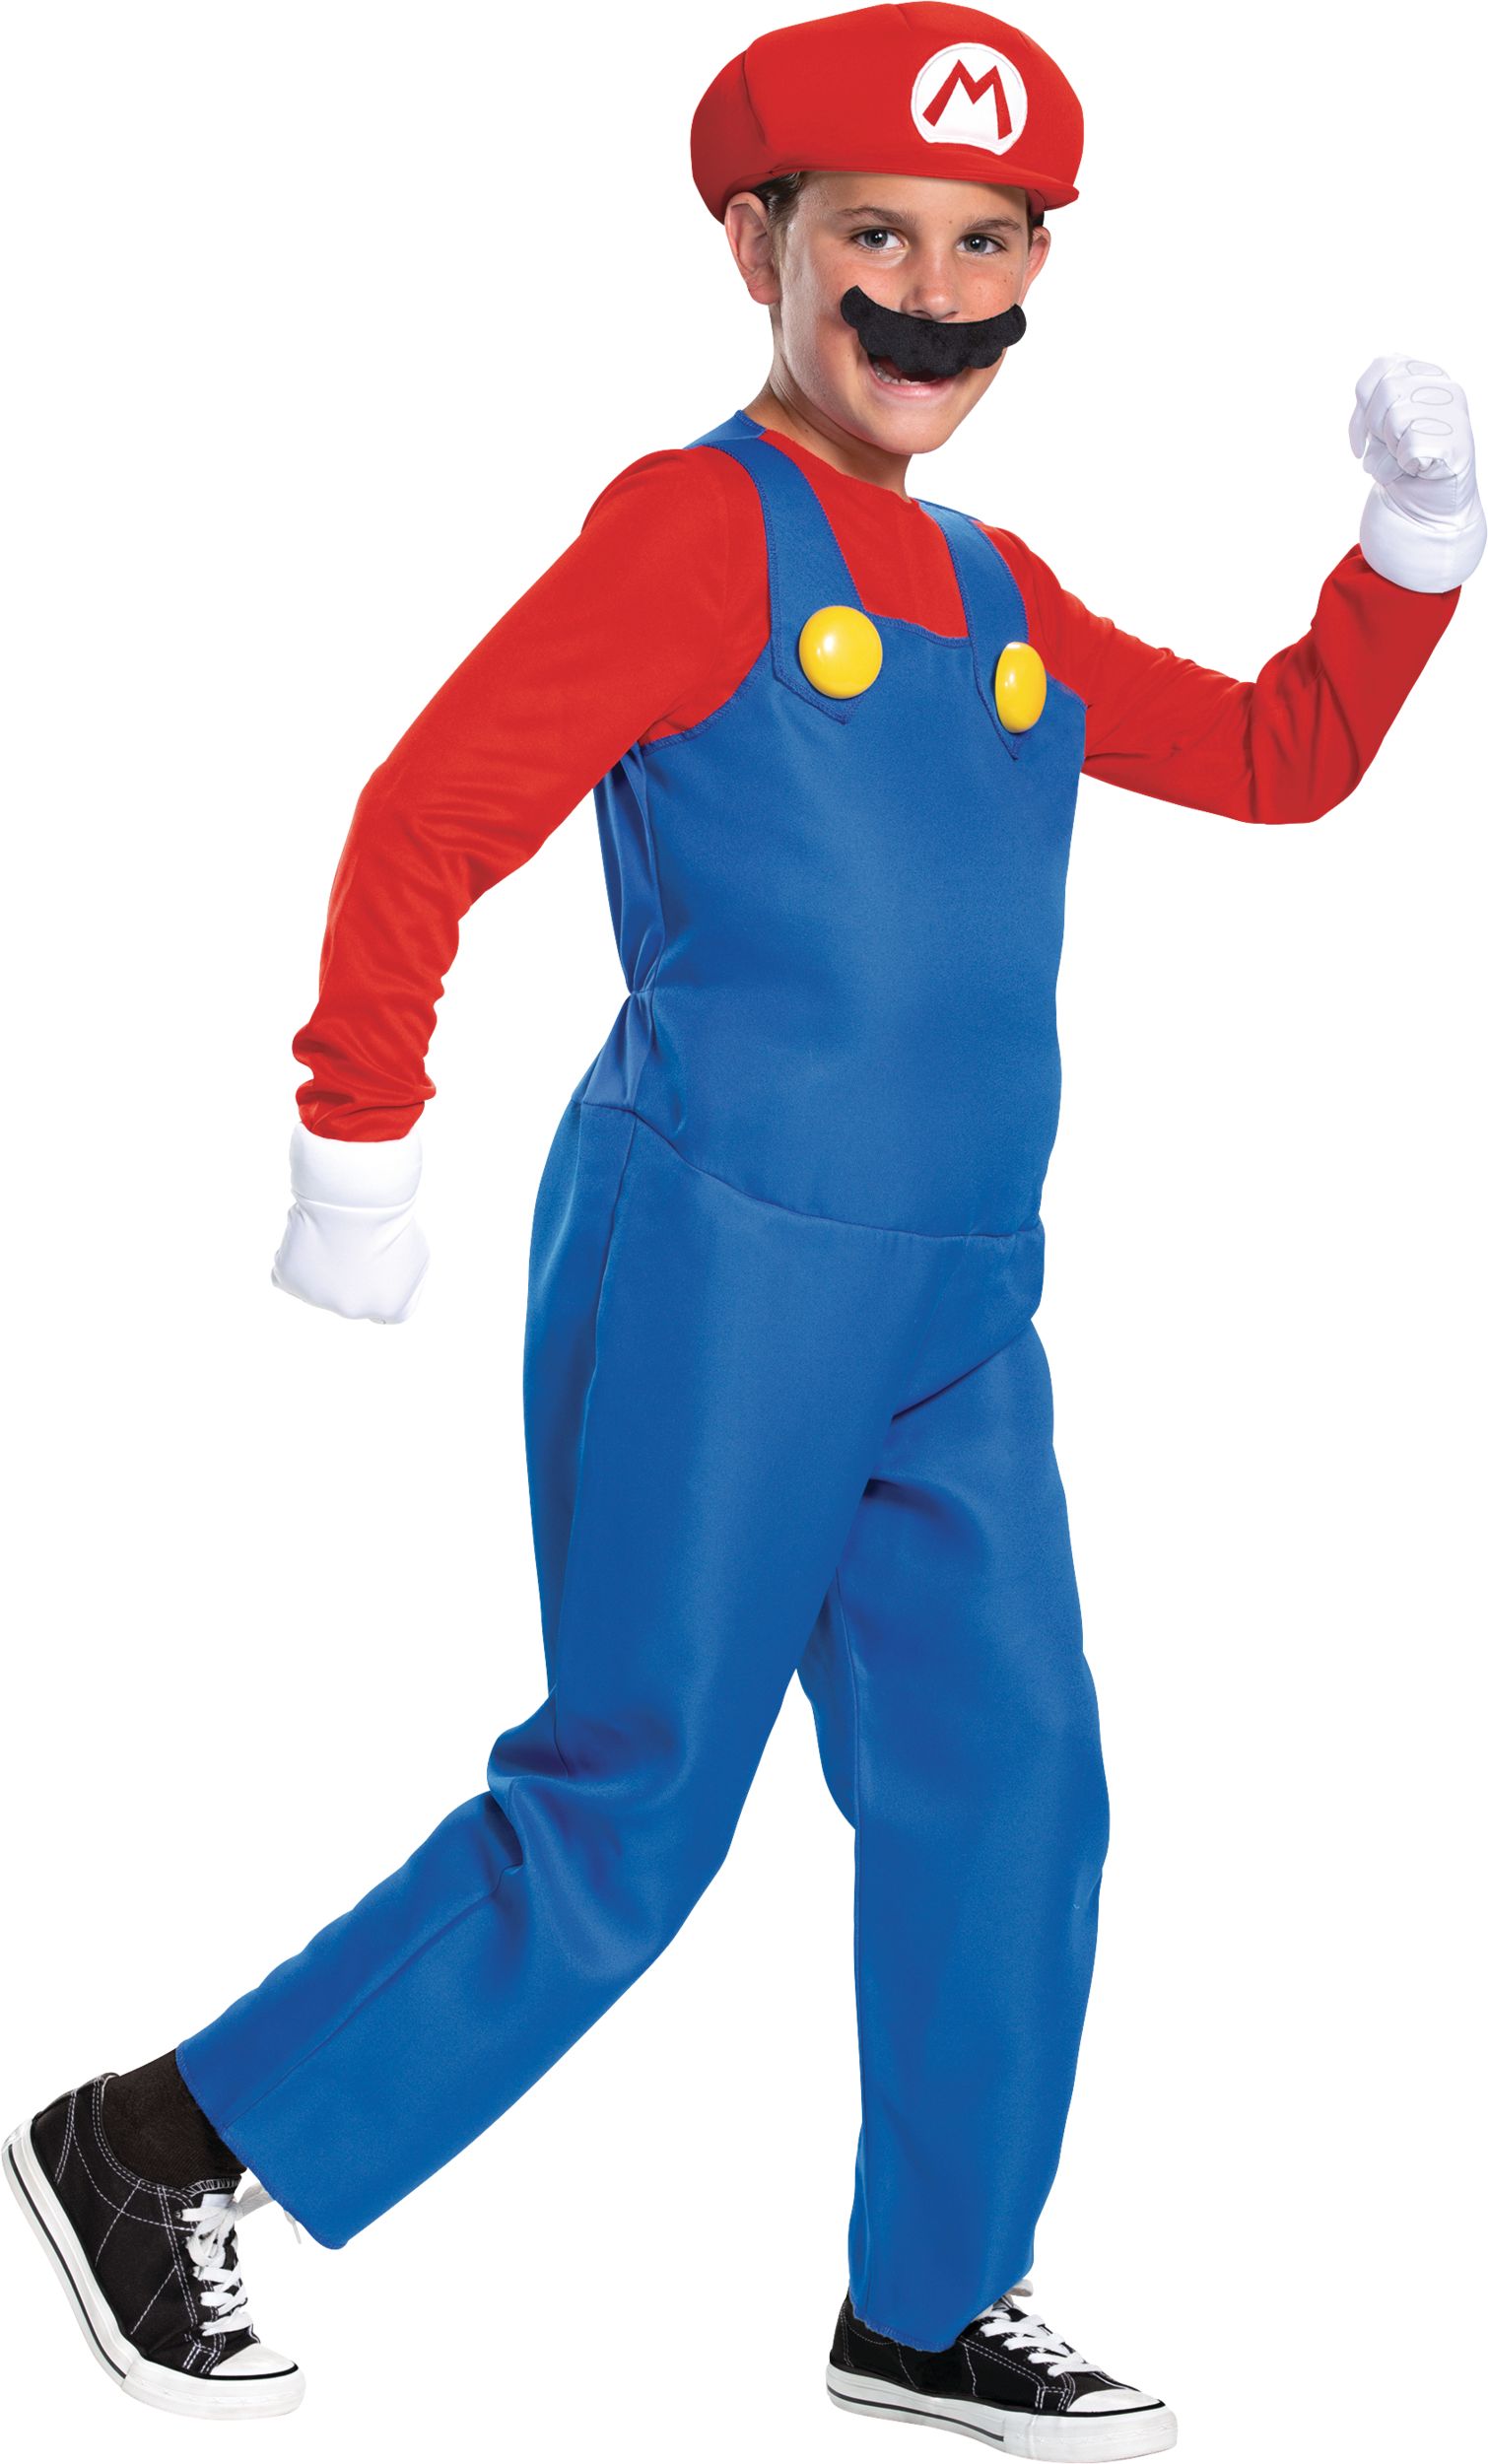 Kids' Super Mario Brothers Mario Costume, More Options Available